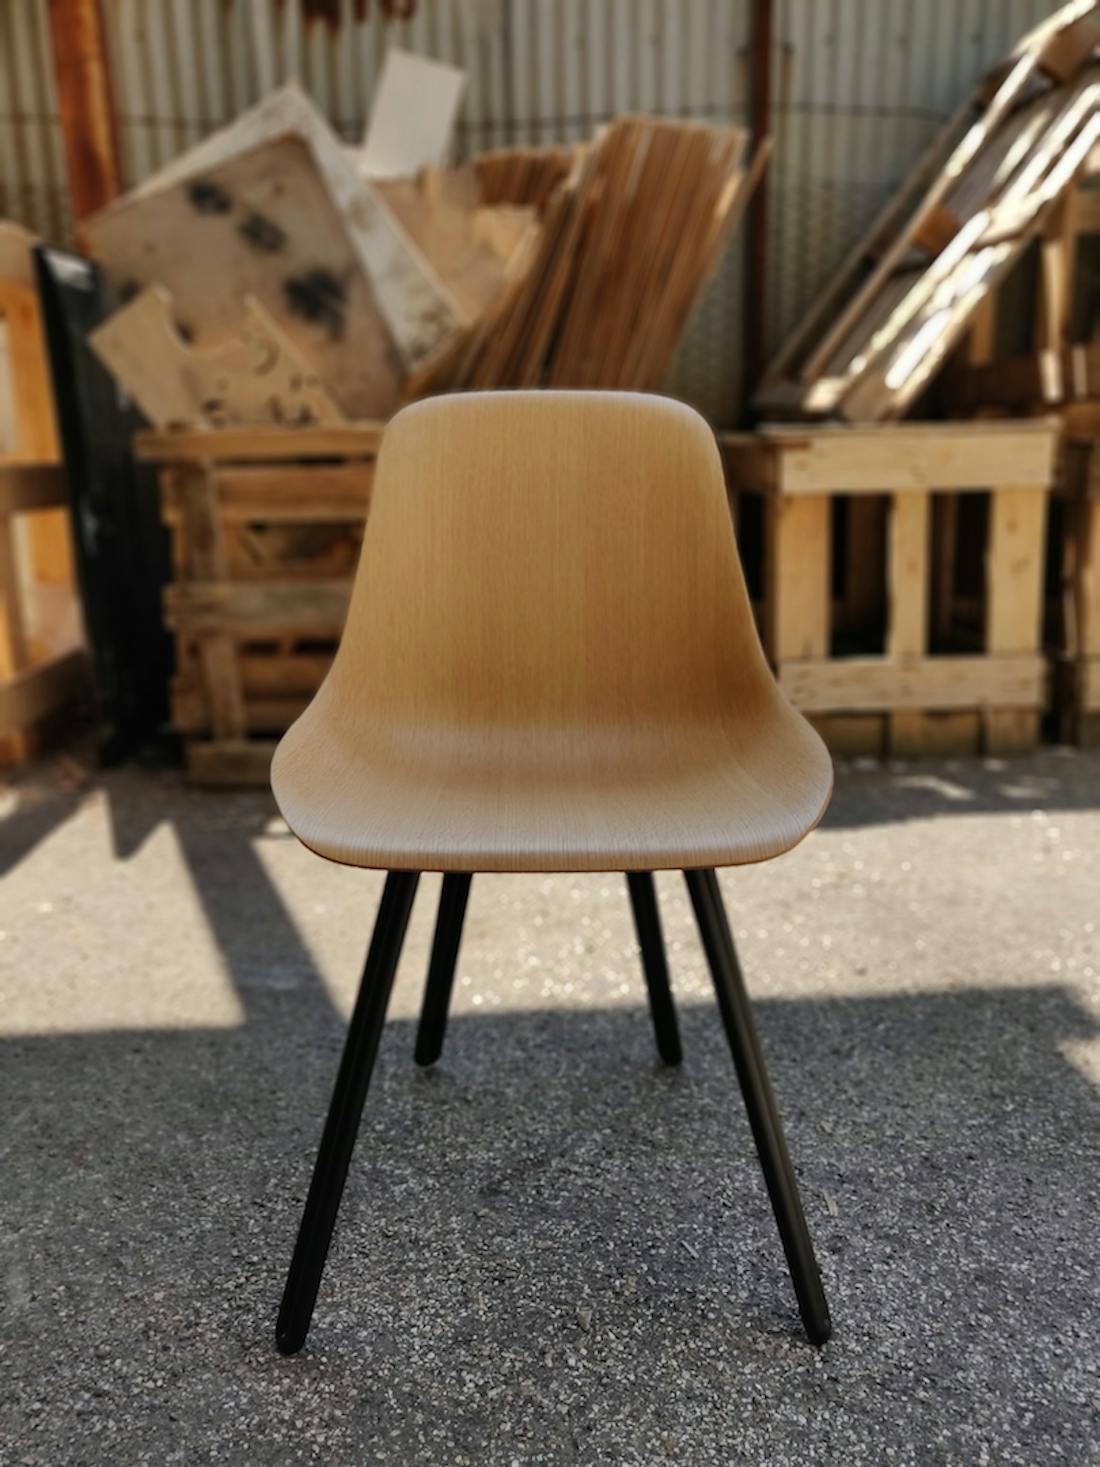 W9 Wooden Side Chair by Kubikoff, Kubikoff W9 Chair, Kubikoff Chair W9, 3D Veneer technology Chair